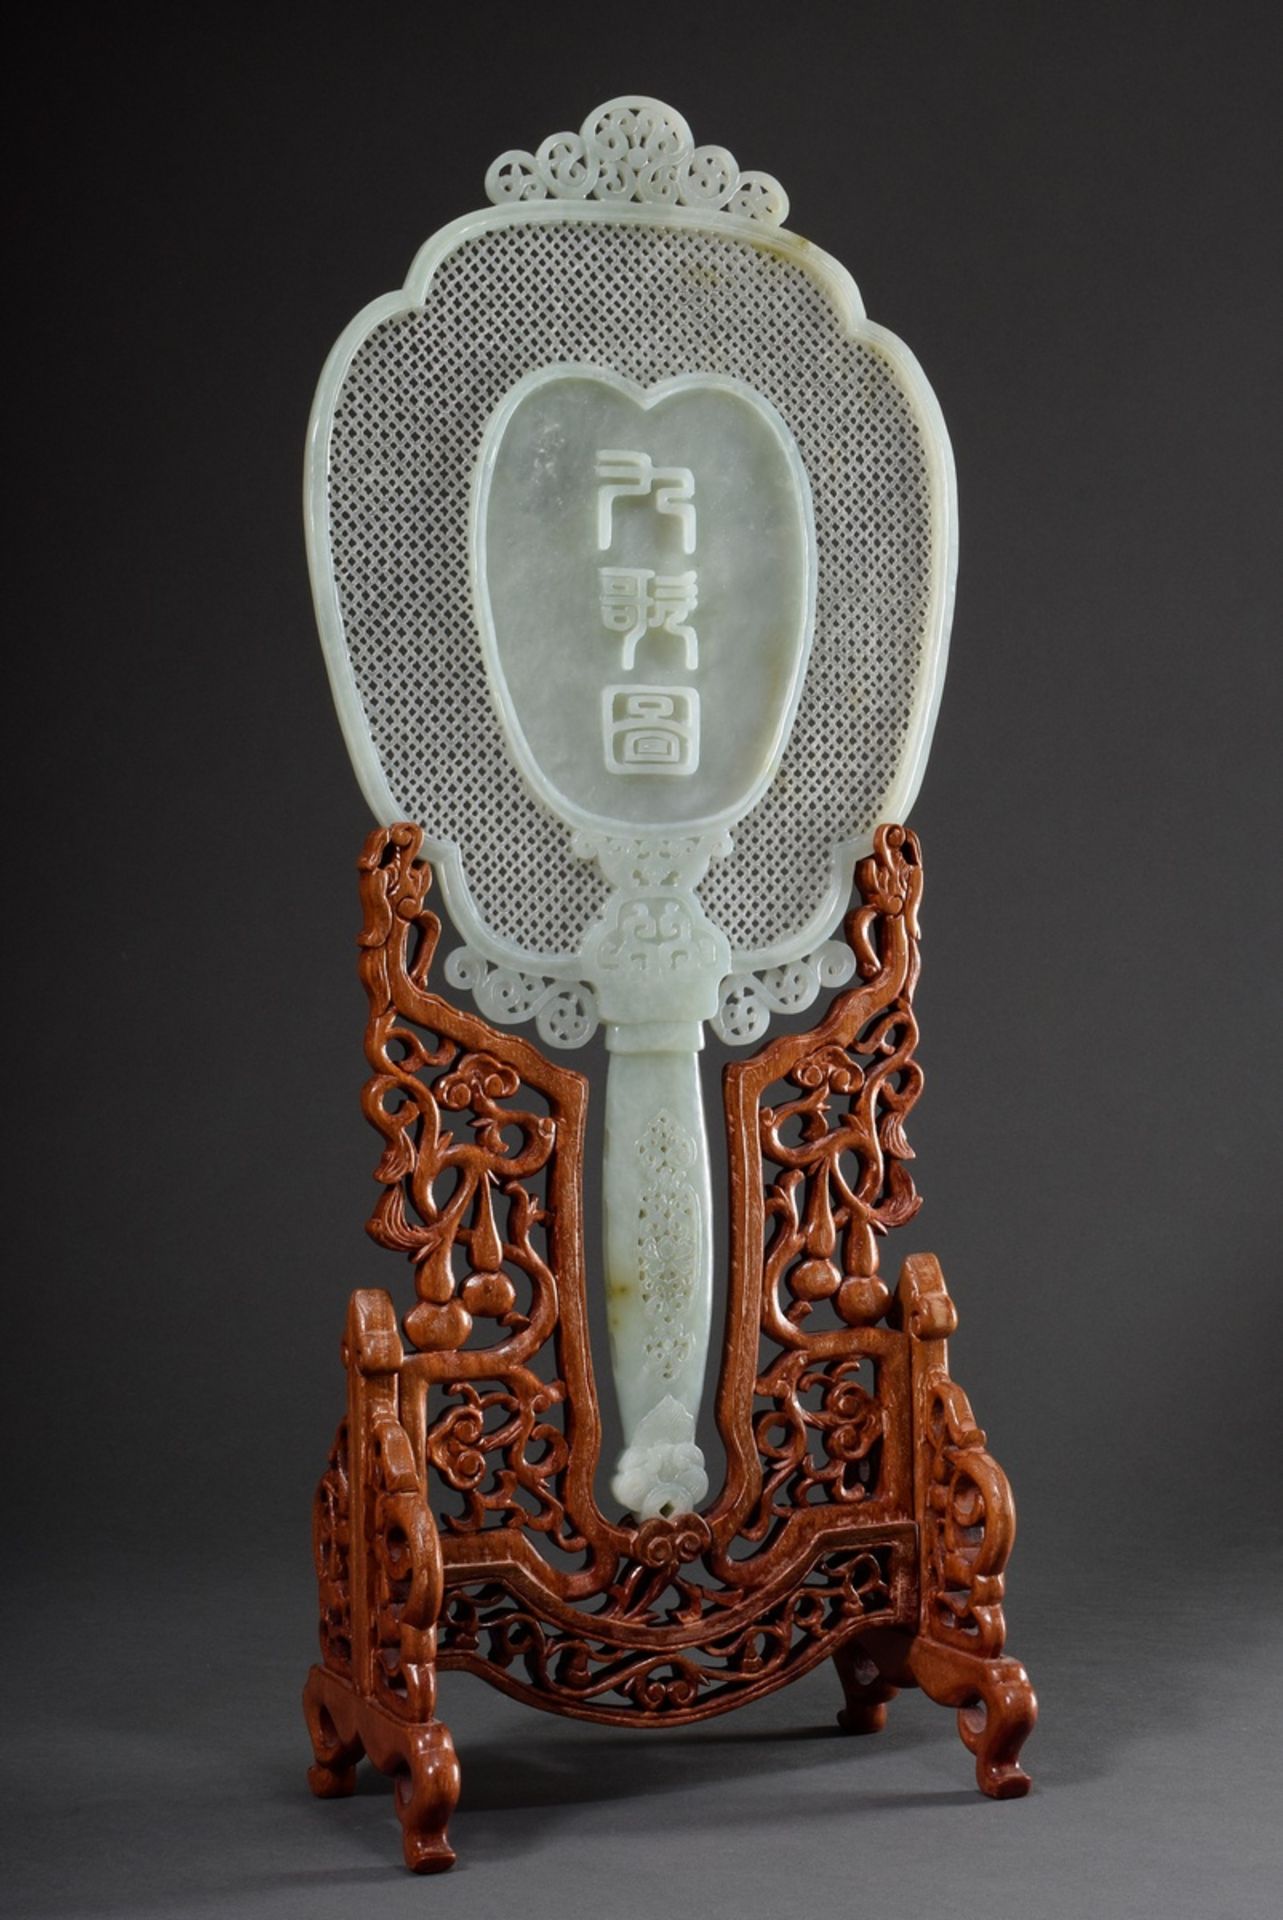 Large Chinese jade carving folding screen in hand mirror or fan form with relief "Two Persons" and  - Image 2 of 8